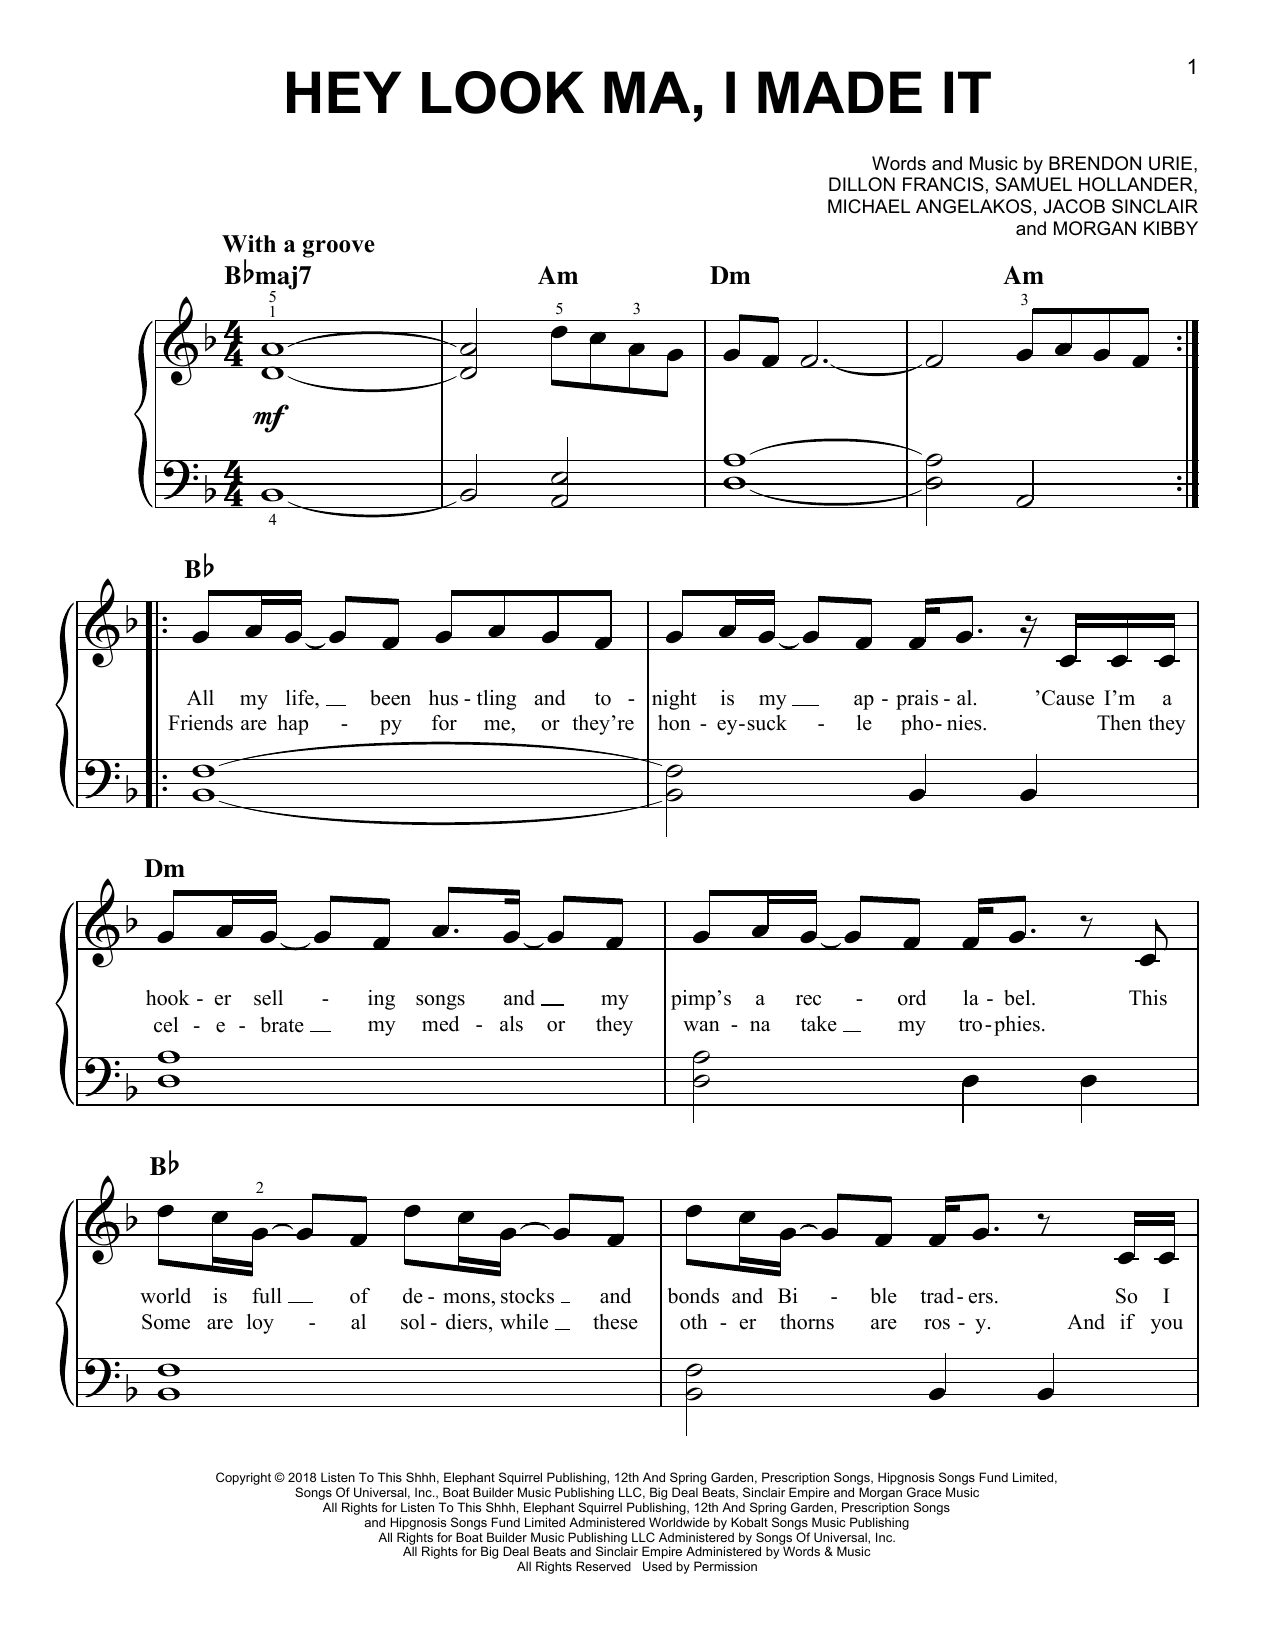 Download Panic! At The Disco Hey Look Ma, I Made It Sheet Music